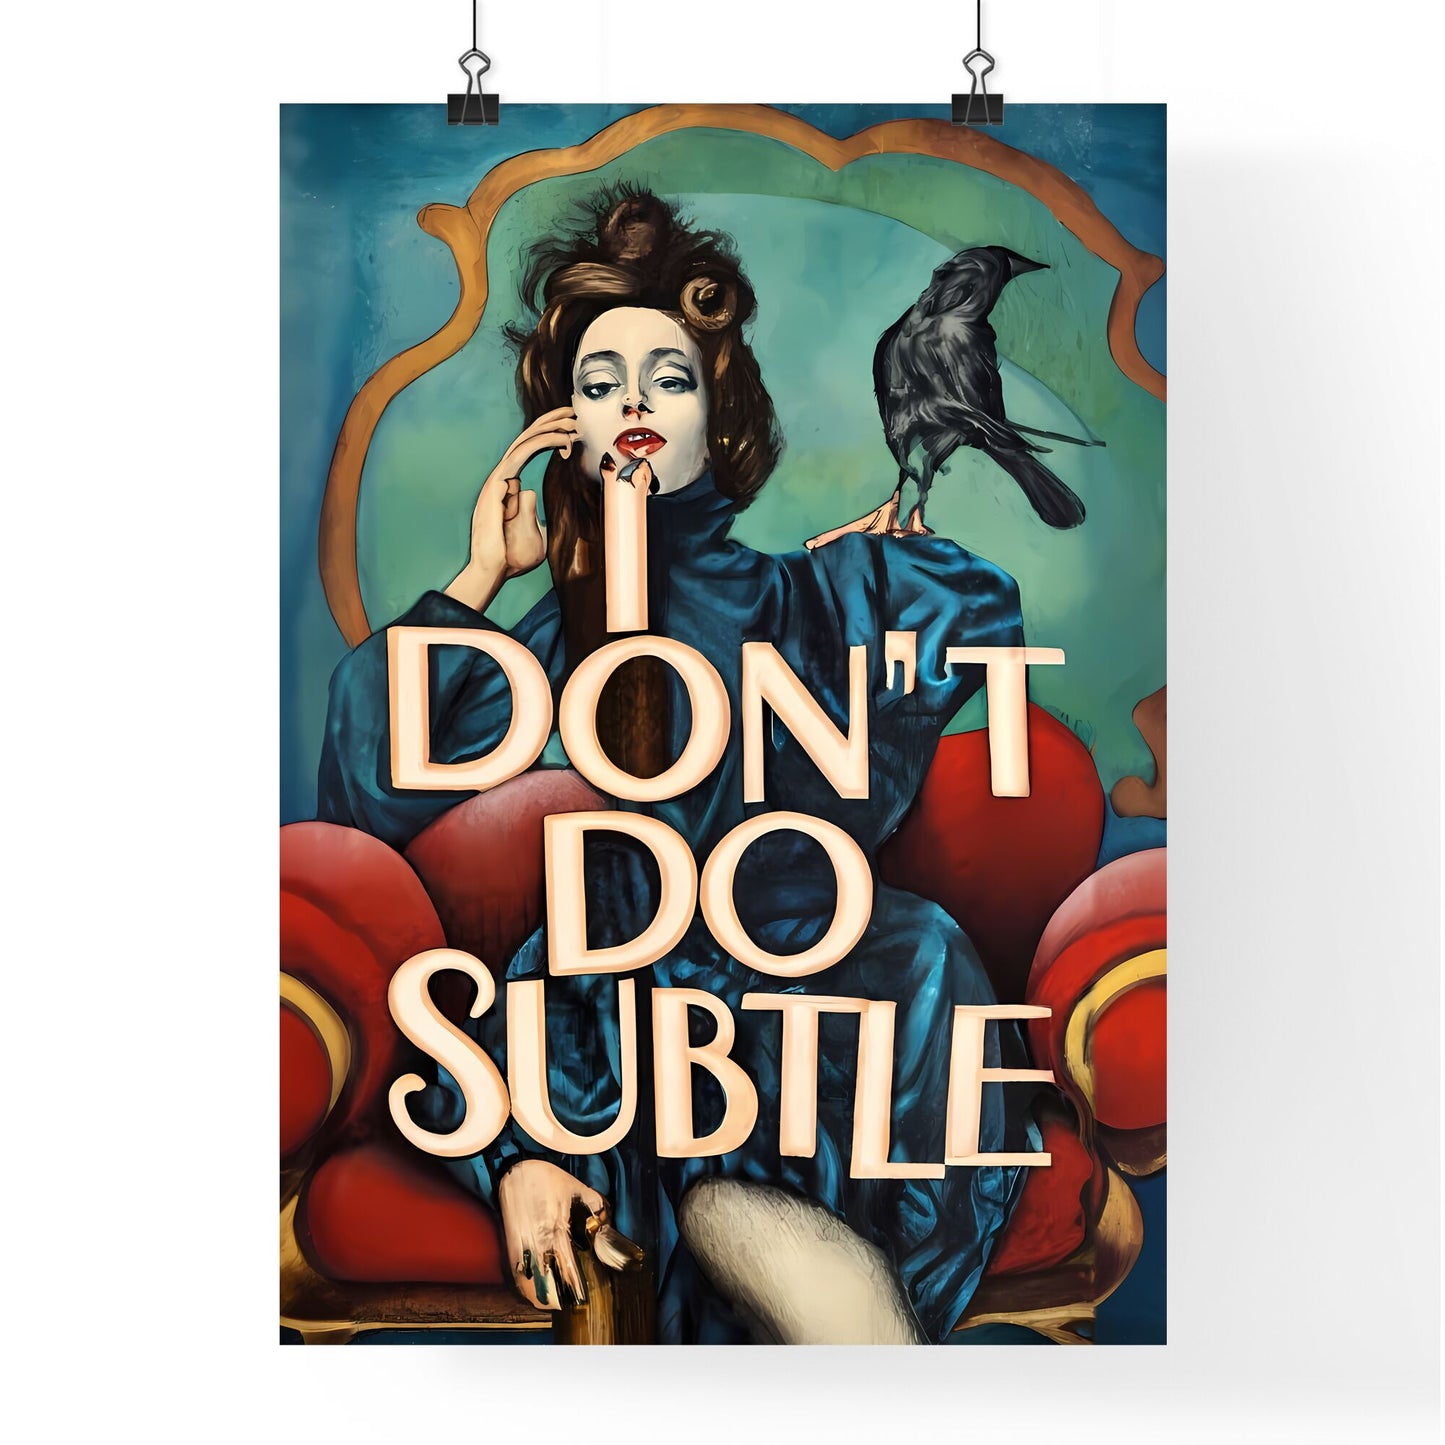 Don’t Do Subtile - A Woman Sitting In A Chair With A Bird On Her Shoulder Default Title